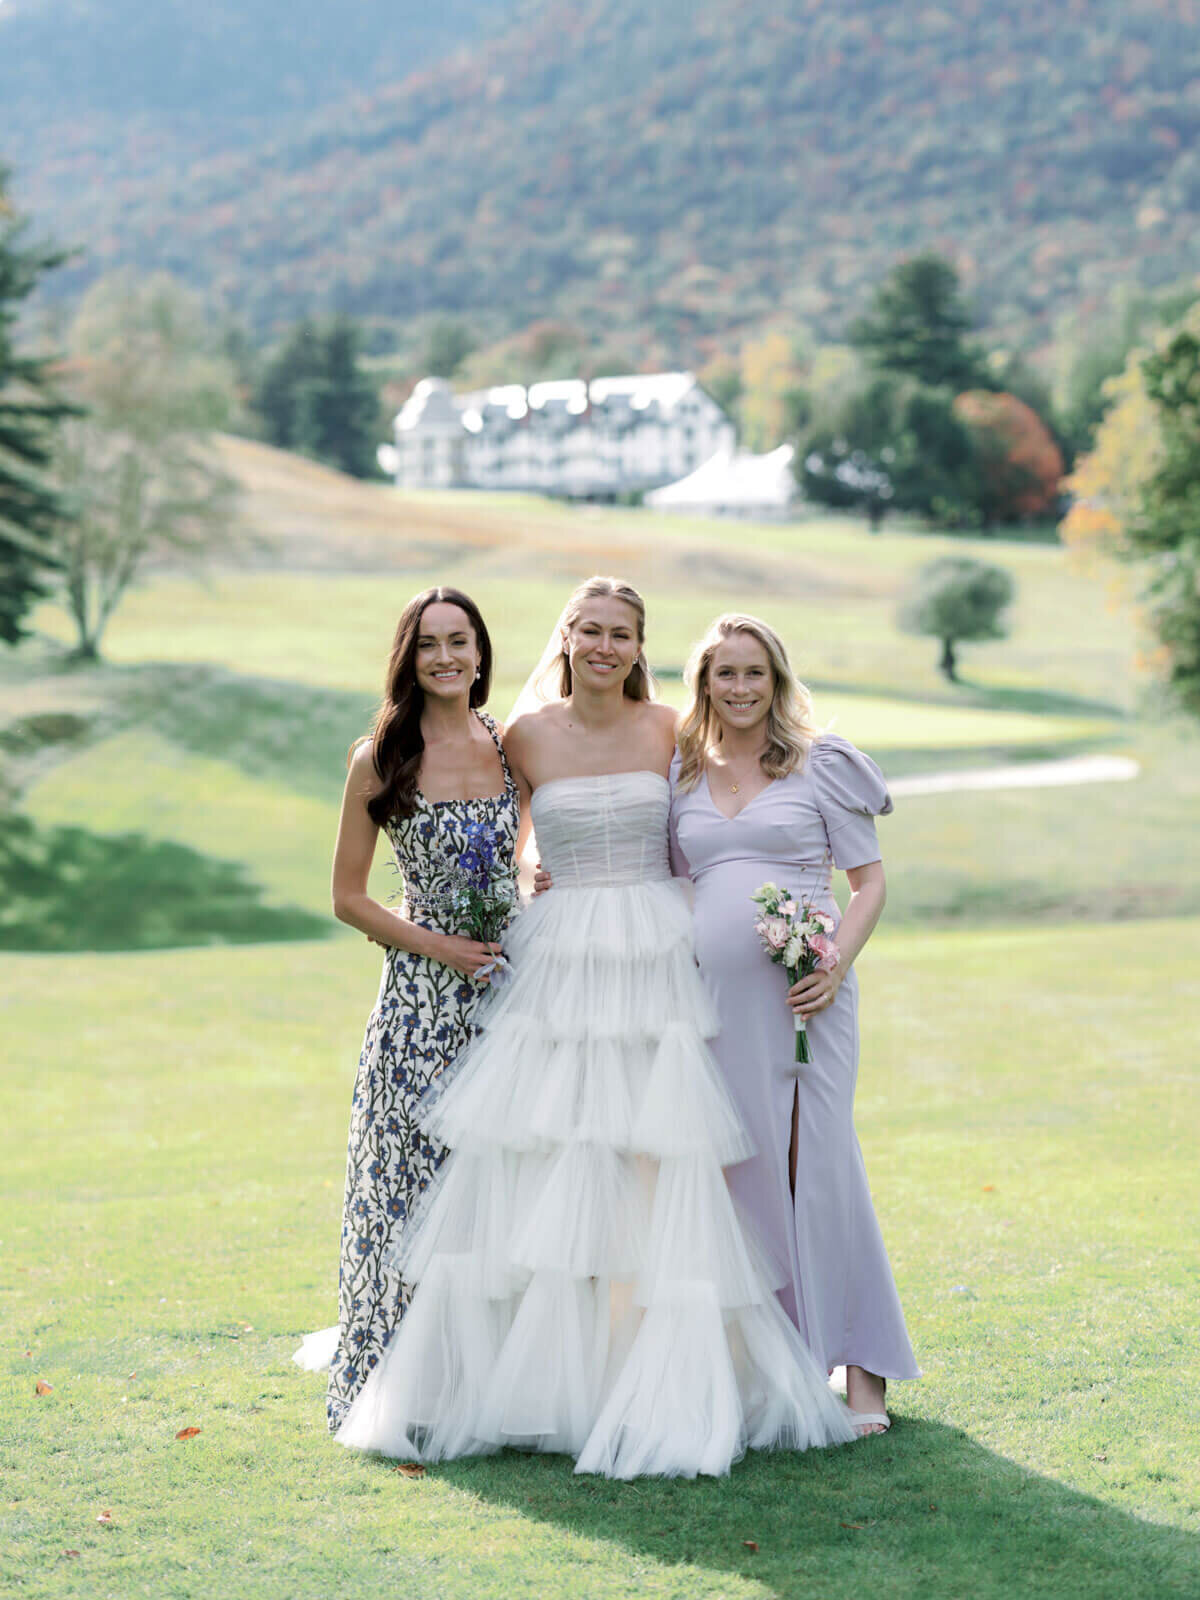 The bride with two women at The Ausable Club golf course, hotel and mountains in the background. Image by Jenny Fu Studio.